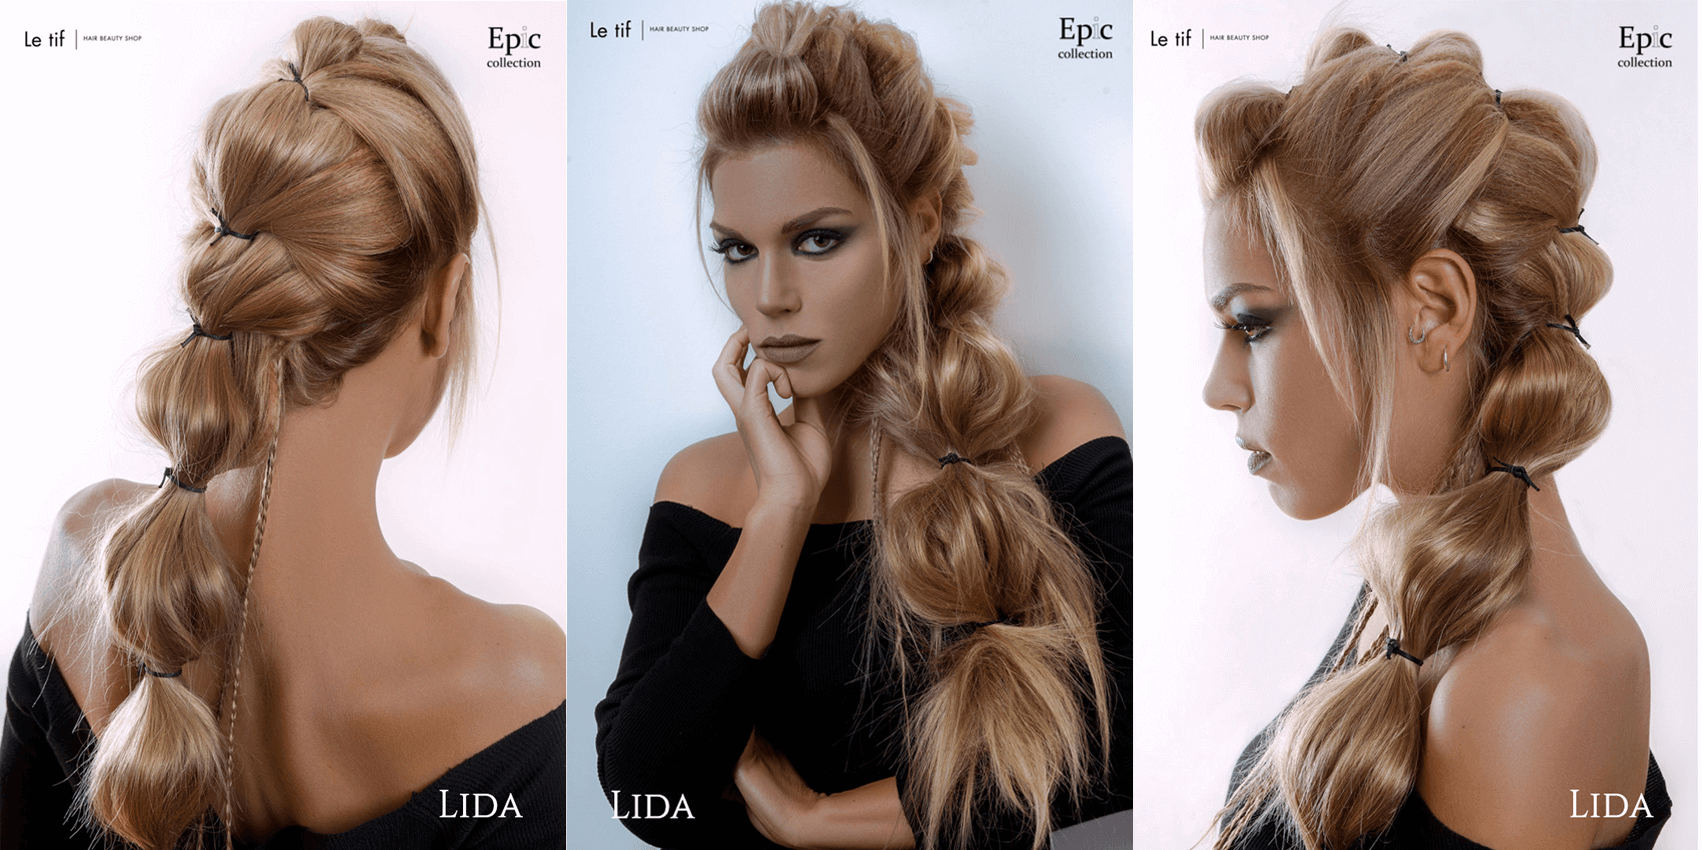 epic-collection-Lida